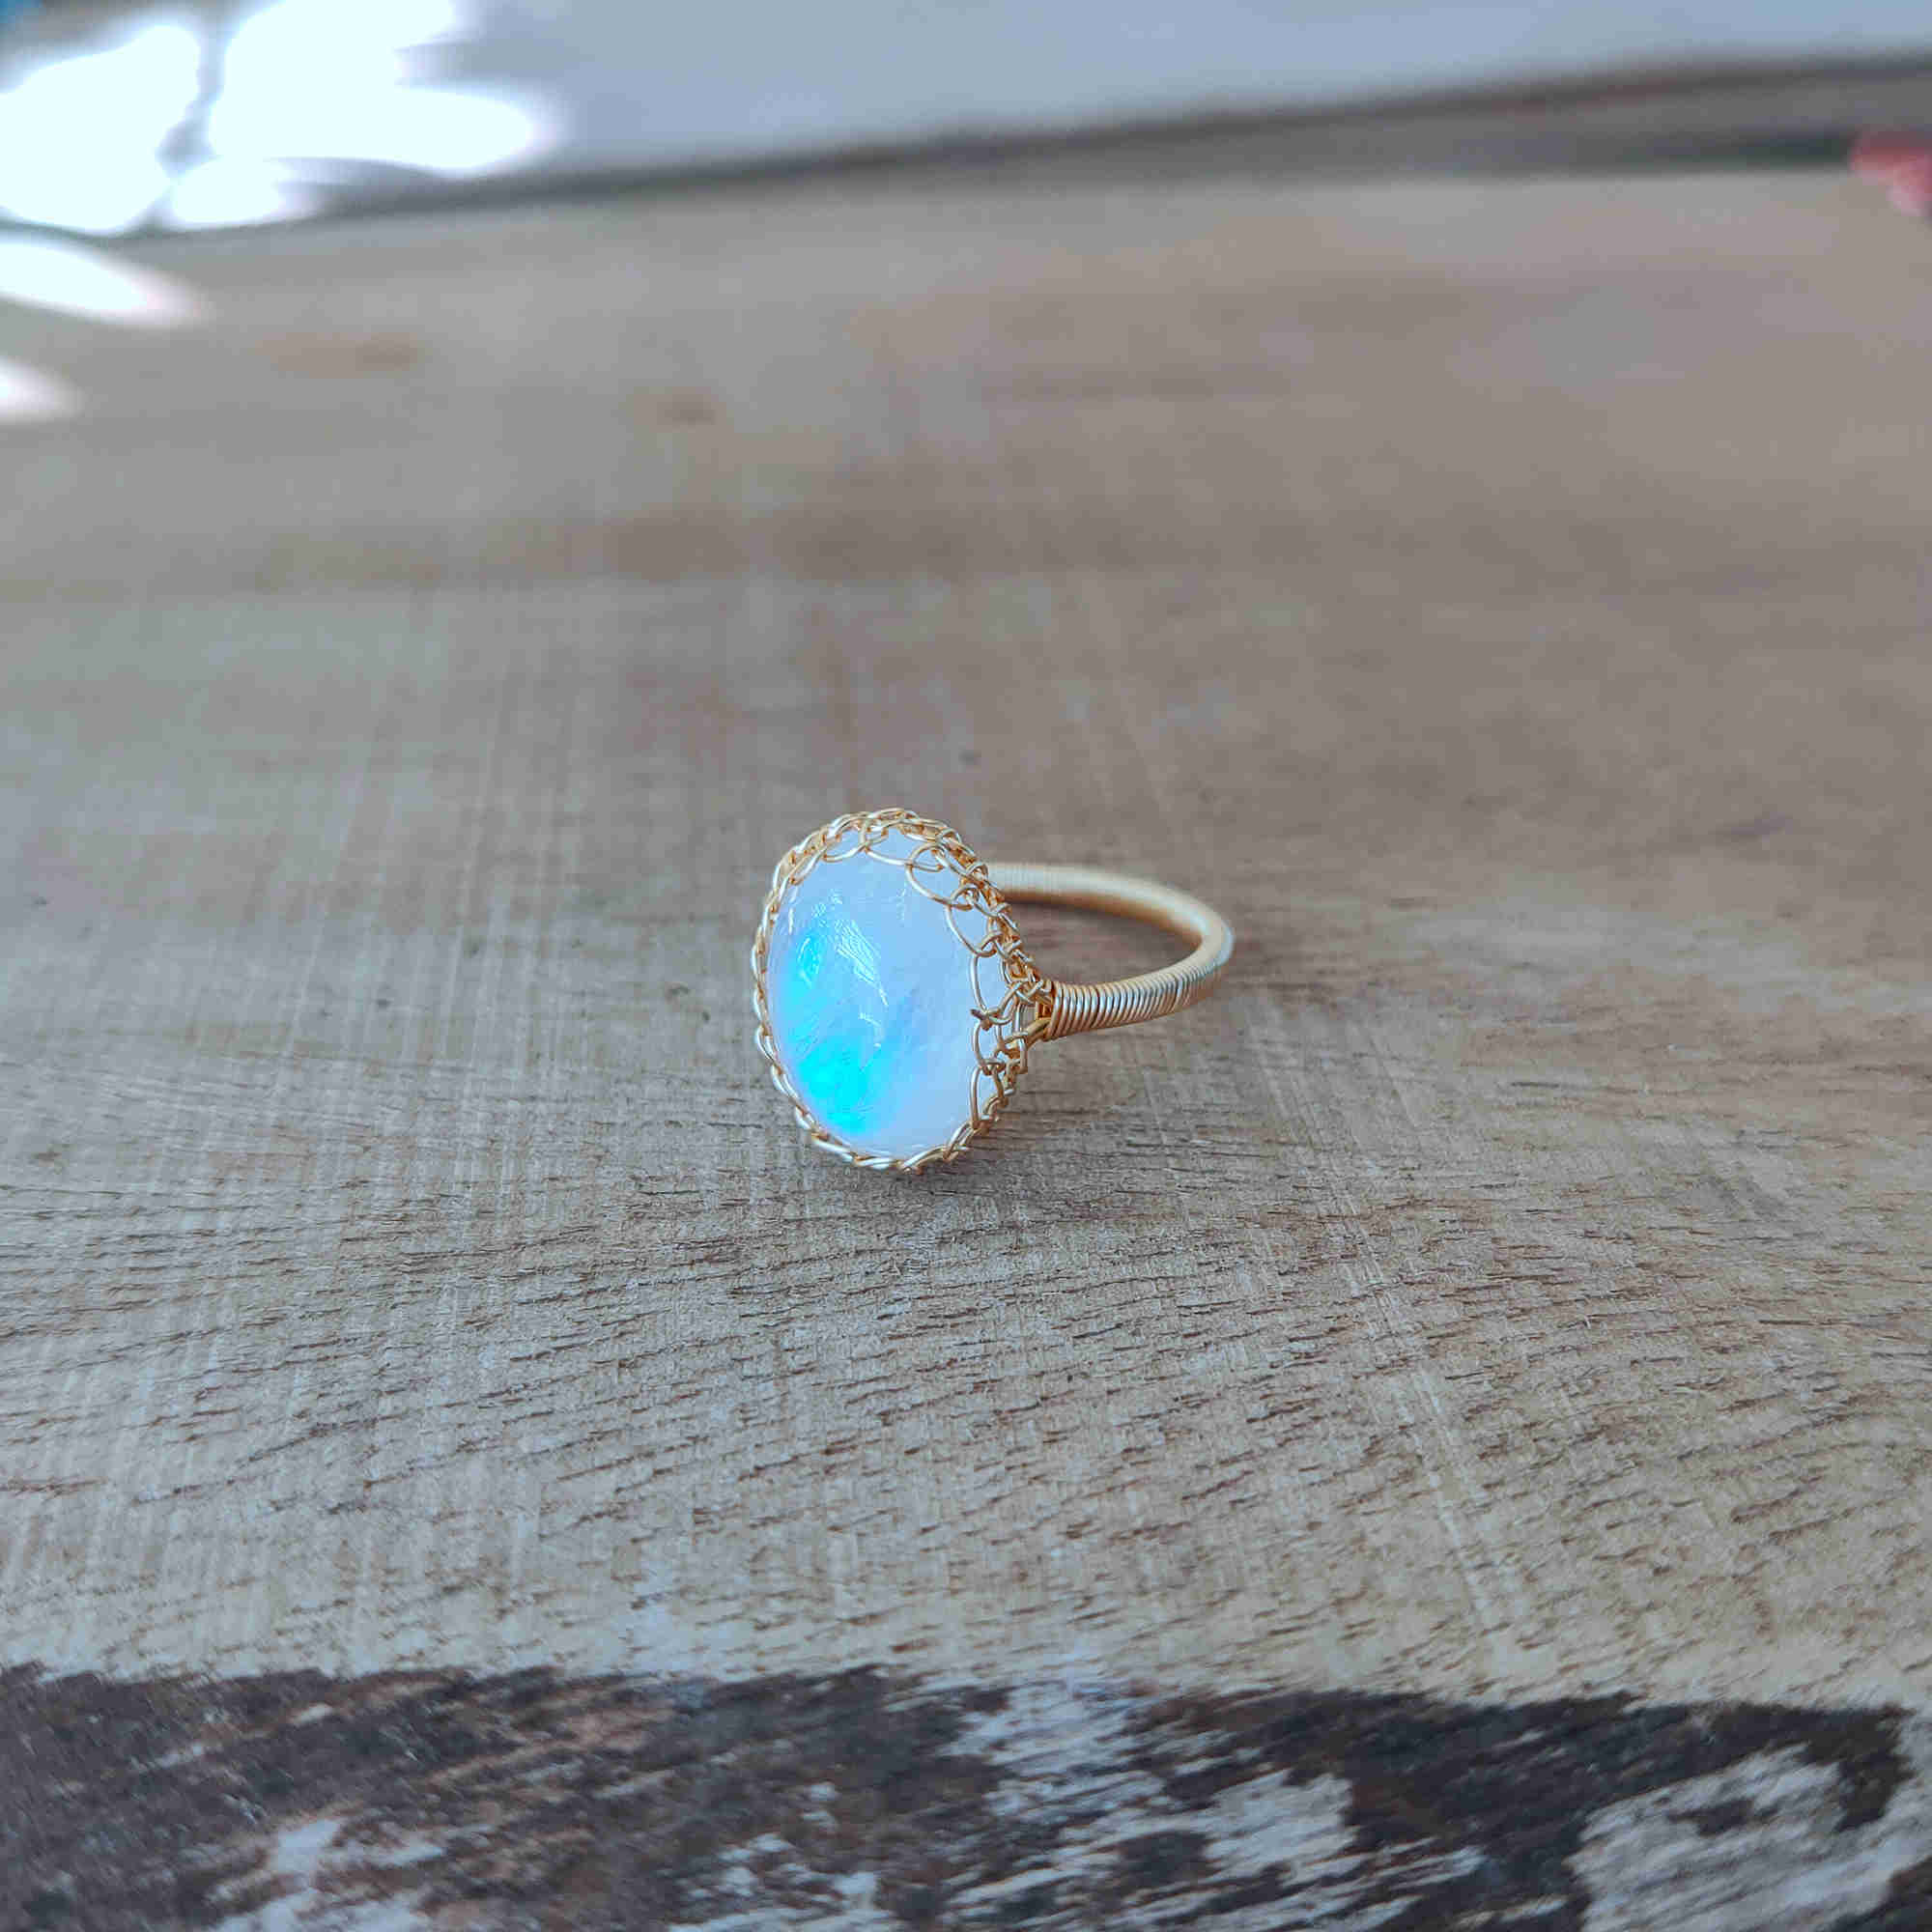 Gold Wire Wrap Moonstone Ring, Adjustable, Healing Gemstone Ring, Handmade Jewelry HUS228 mother's ring, mother's day gift, gift for her, for women